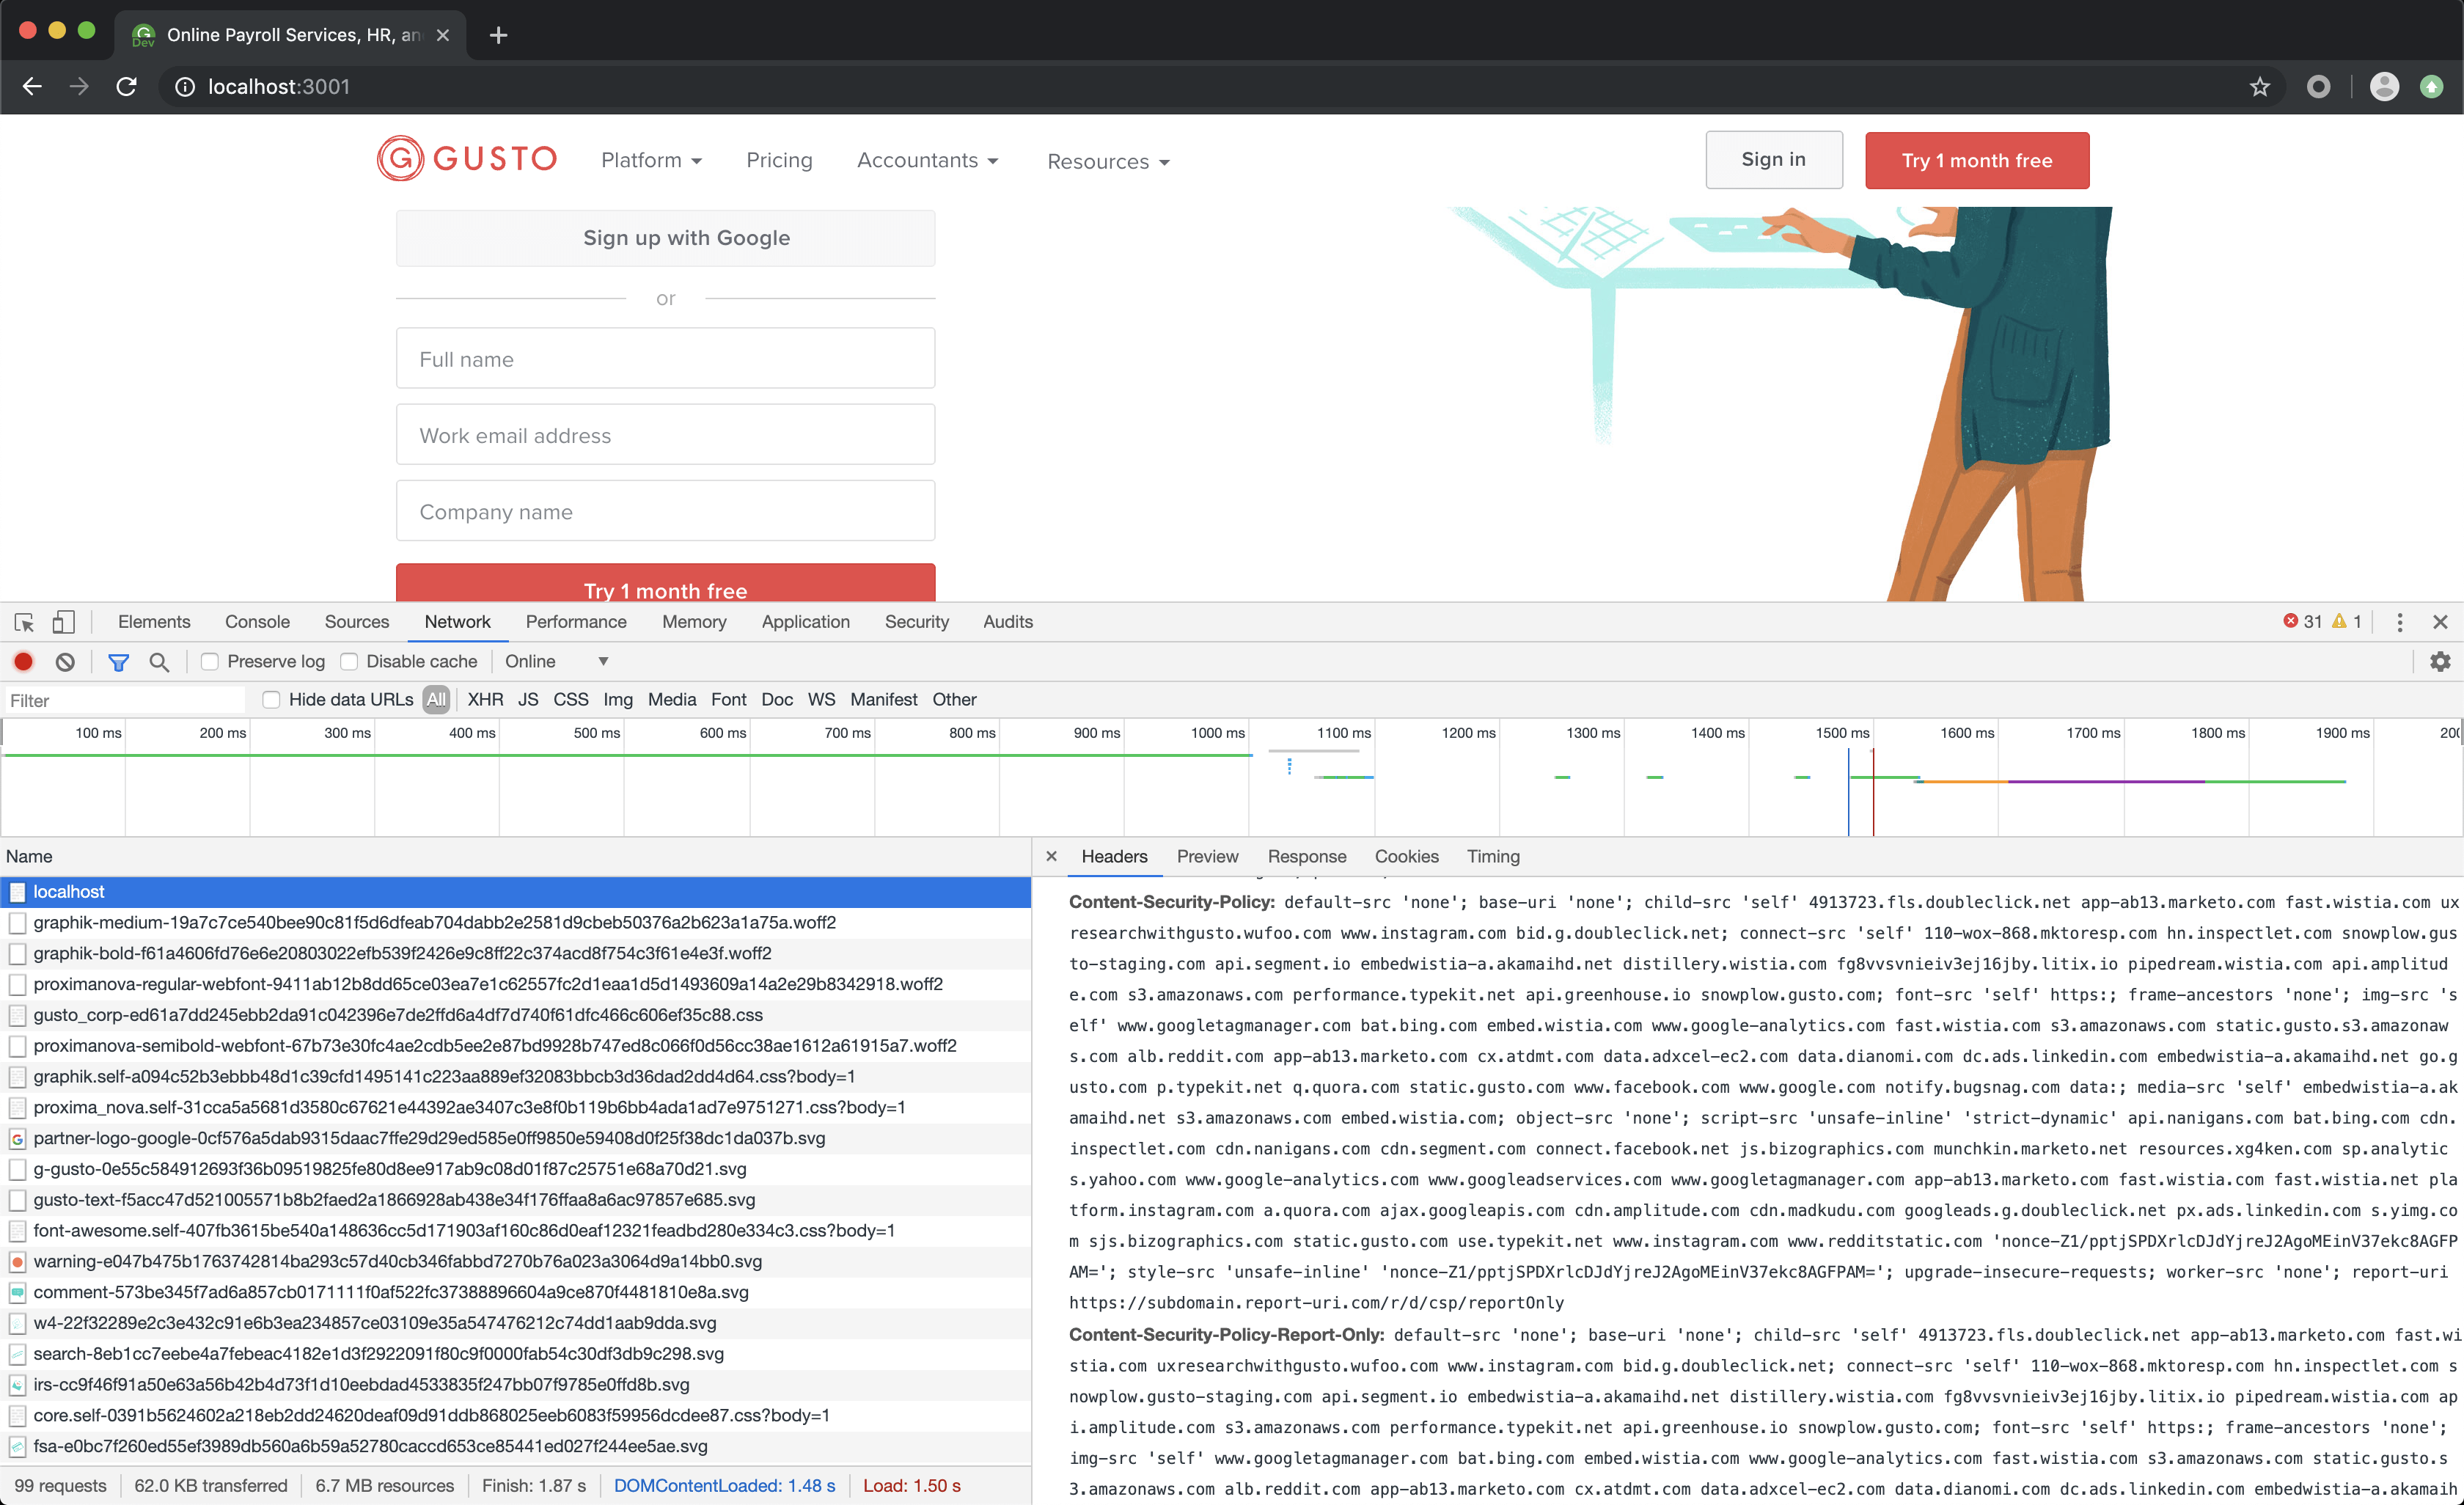 Network tab in Chrome DevTools shows that both Content-Security-Policy and Content-Security-Policy-Report-Only headers are sent